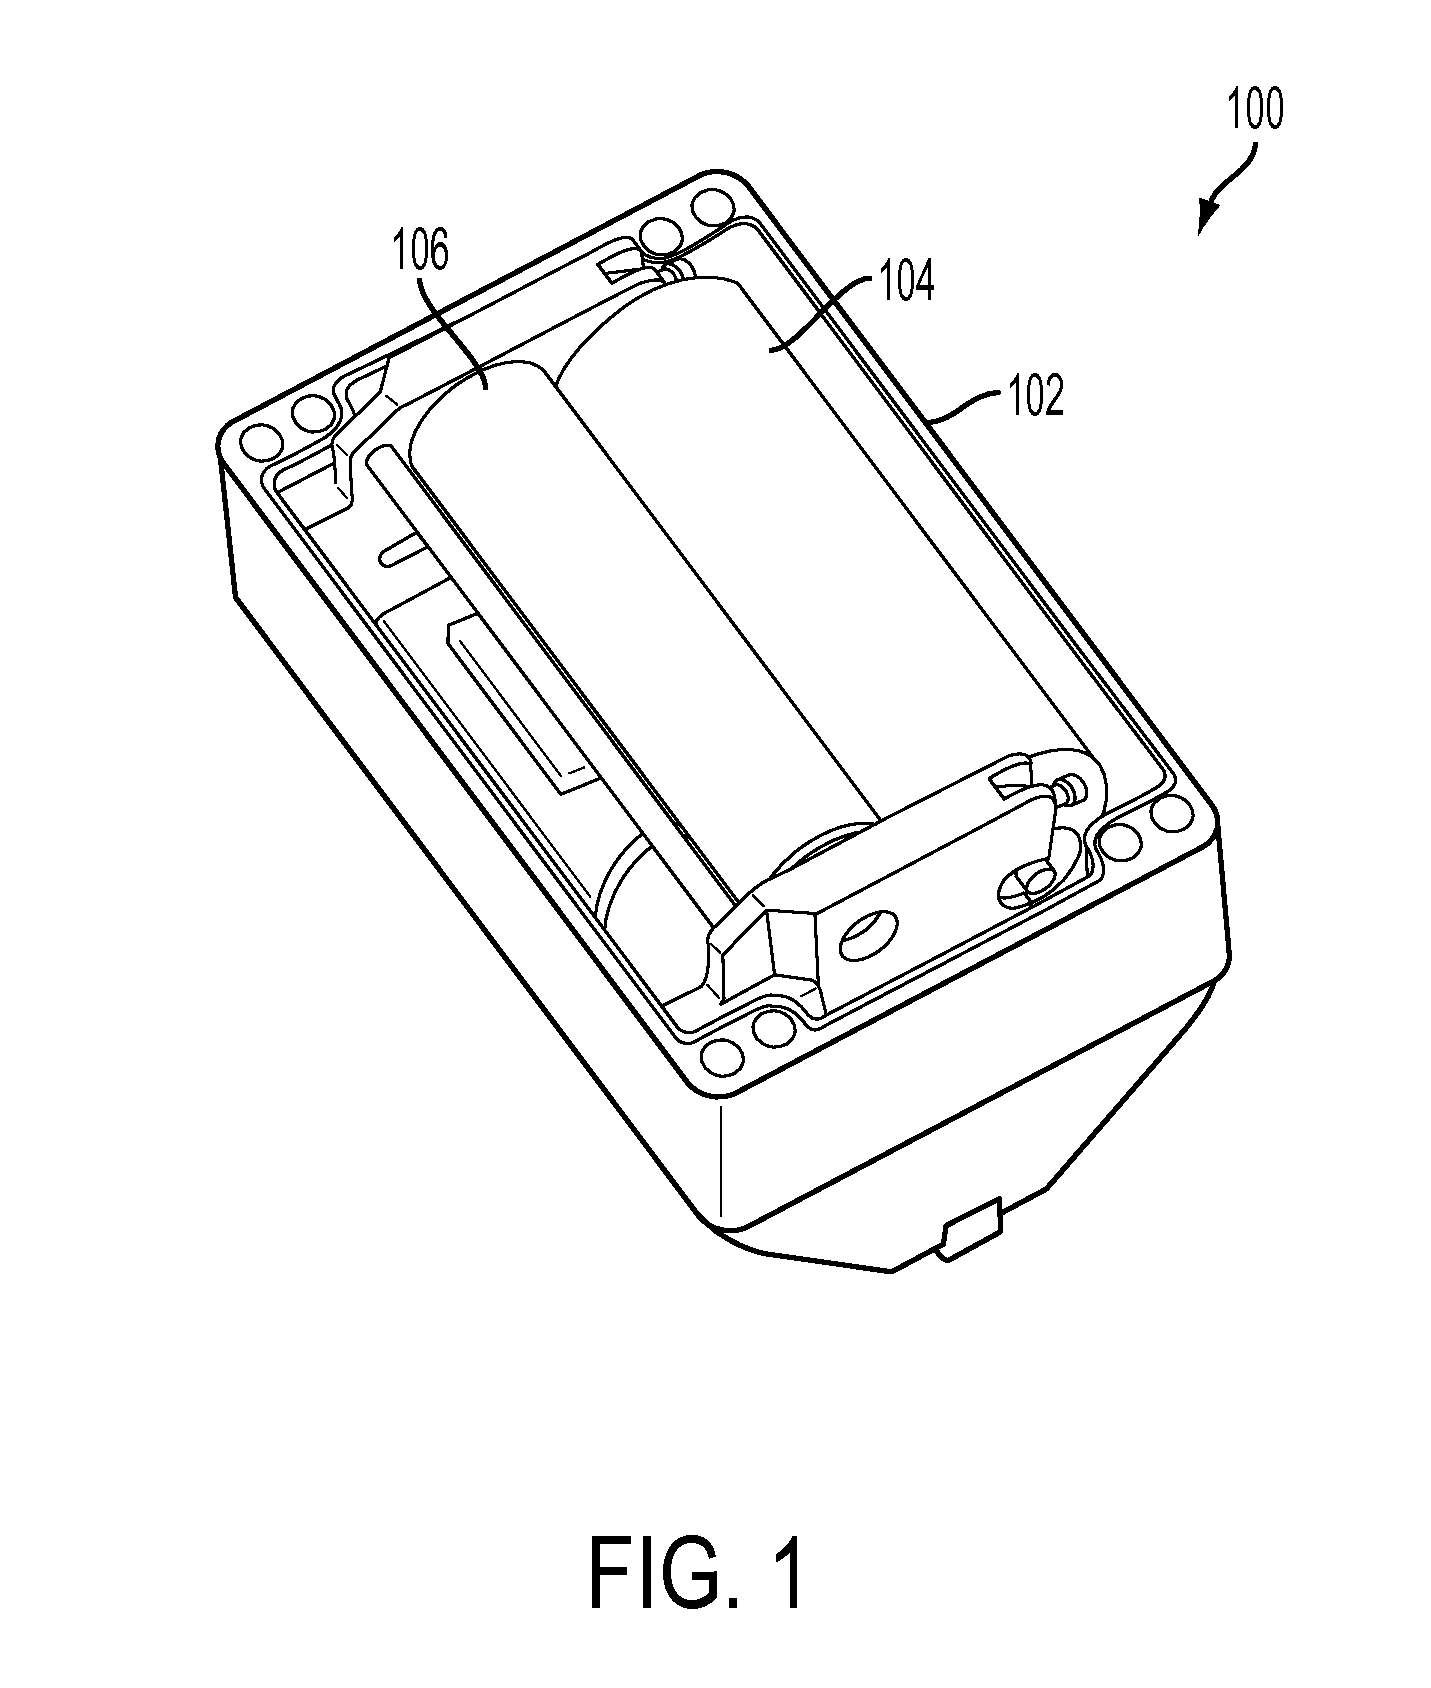 Apparatus and method to generate x-rays by contact electrification